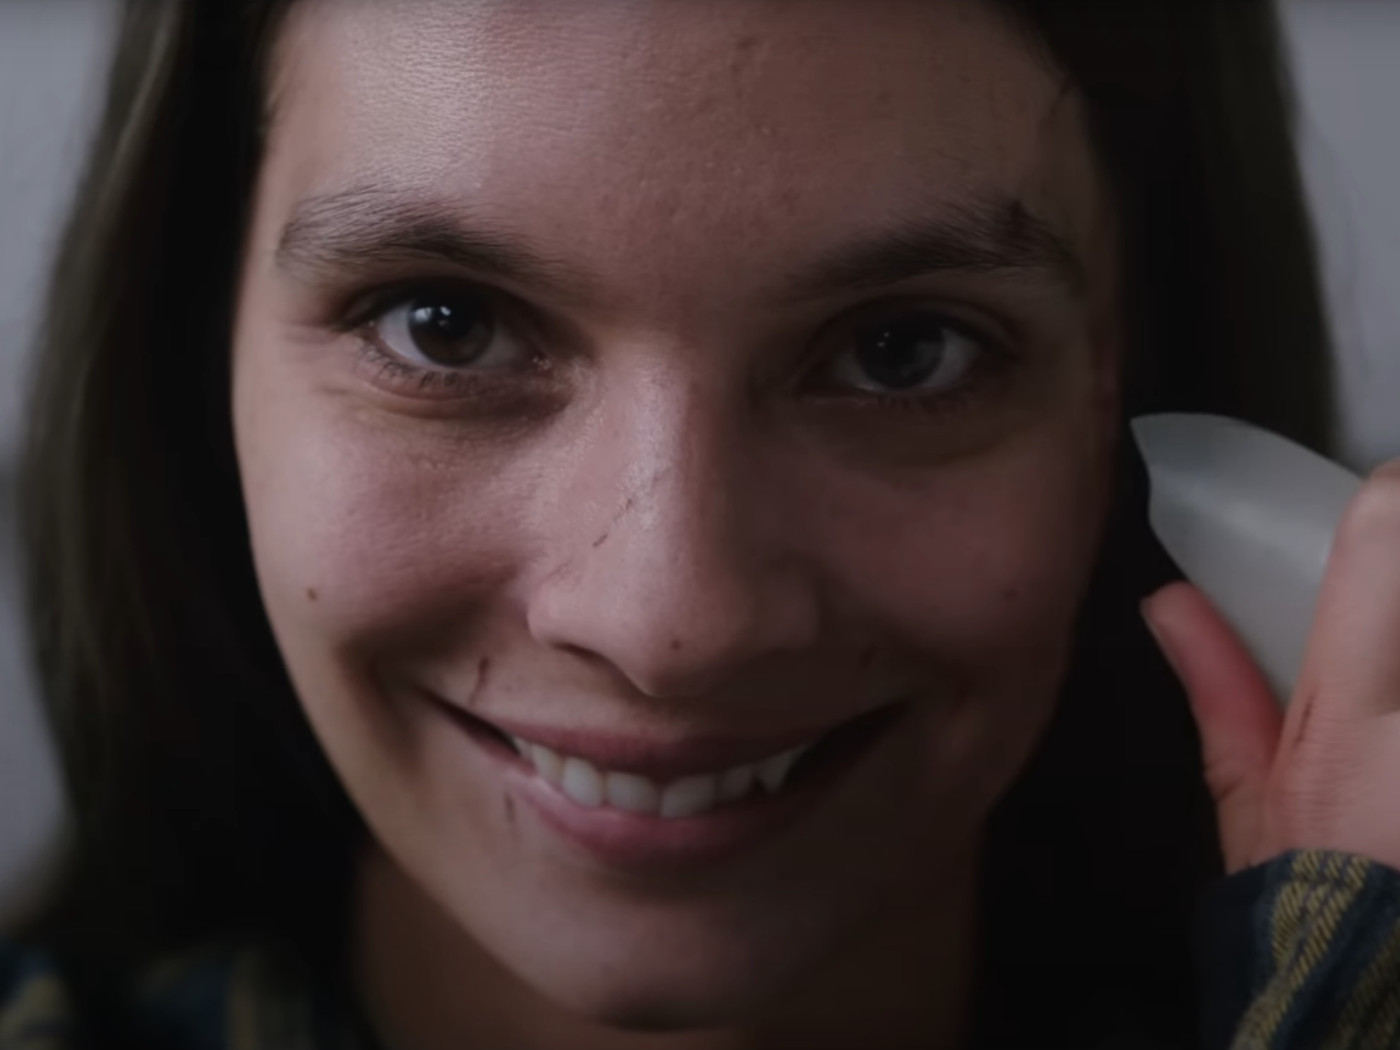 Smile, the upcoming horror movie, has a genuinely frightening new trailer